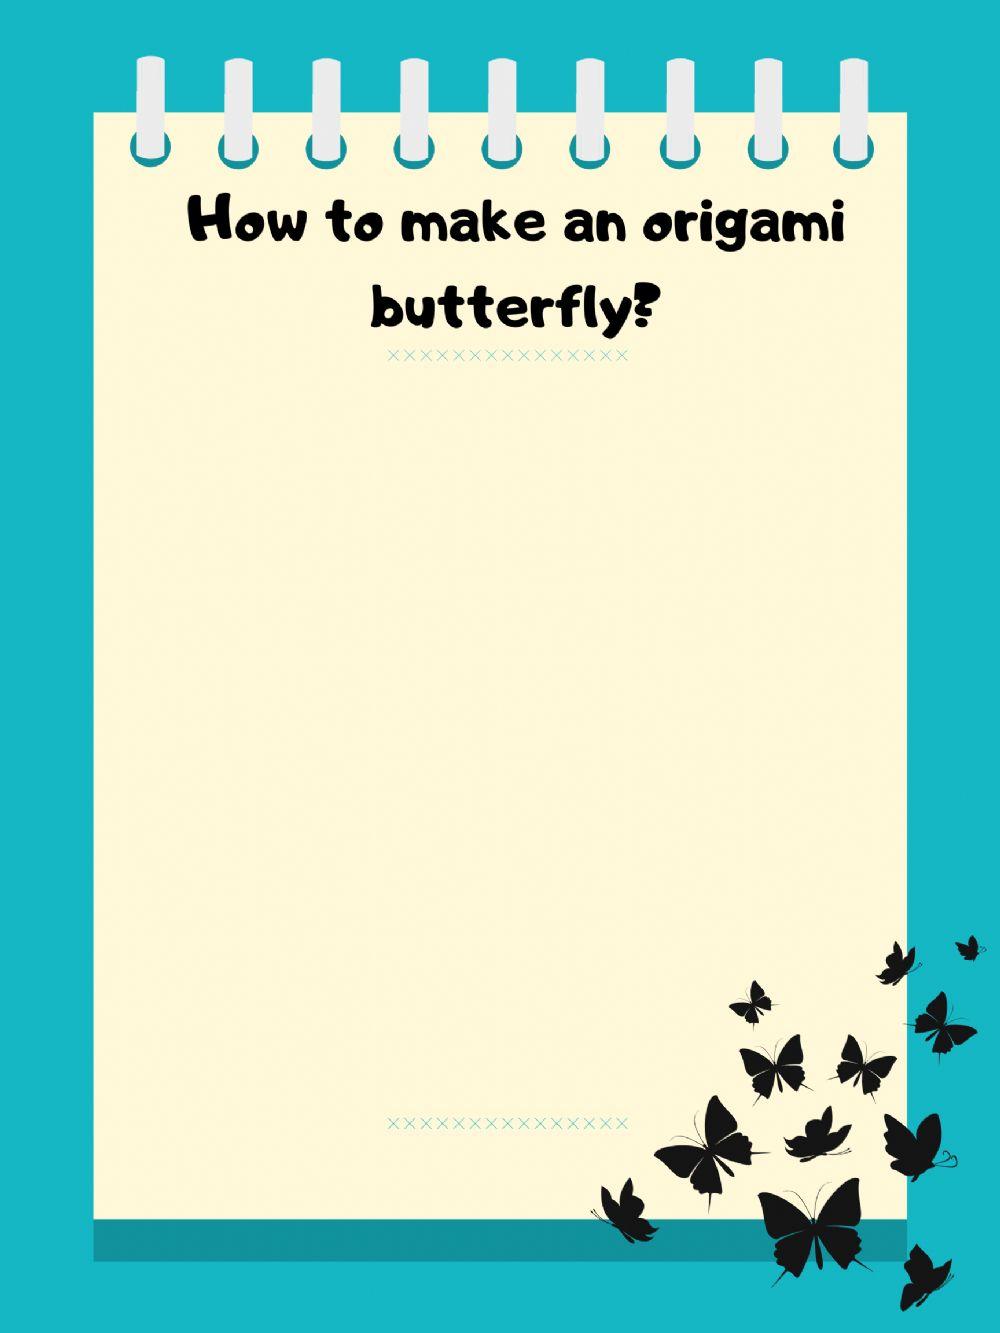 Steps to make an origami butterfly